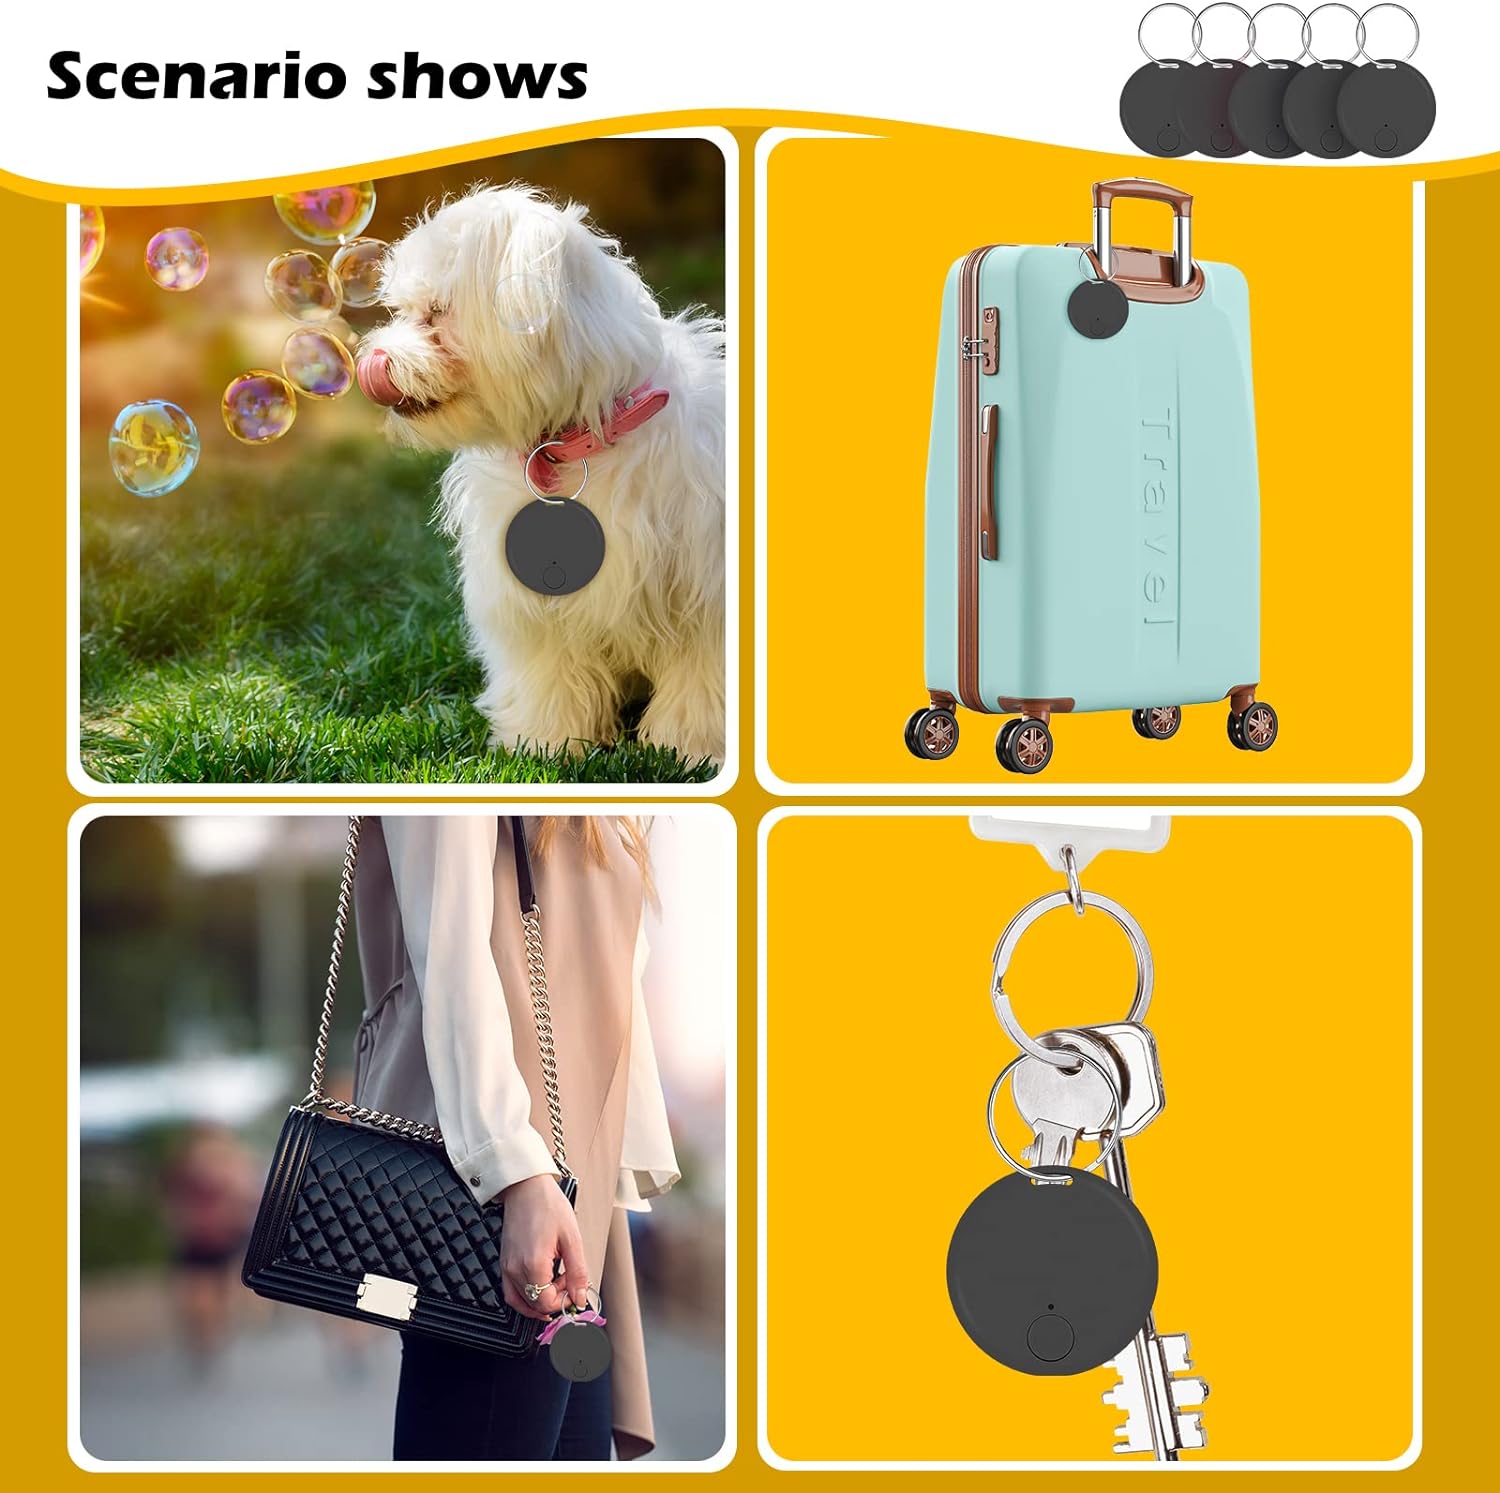 10 Pcs Portable GPS Tracking Device Mobile Tracking Smart Anti Loss Dog Locator Key Finder GPS Smart Tracker Device for Kids Dog Pet Cat Wallet Keychain Luggage, Alarm Reminder, App Control